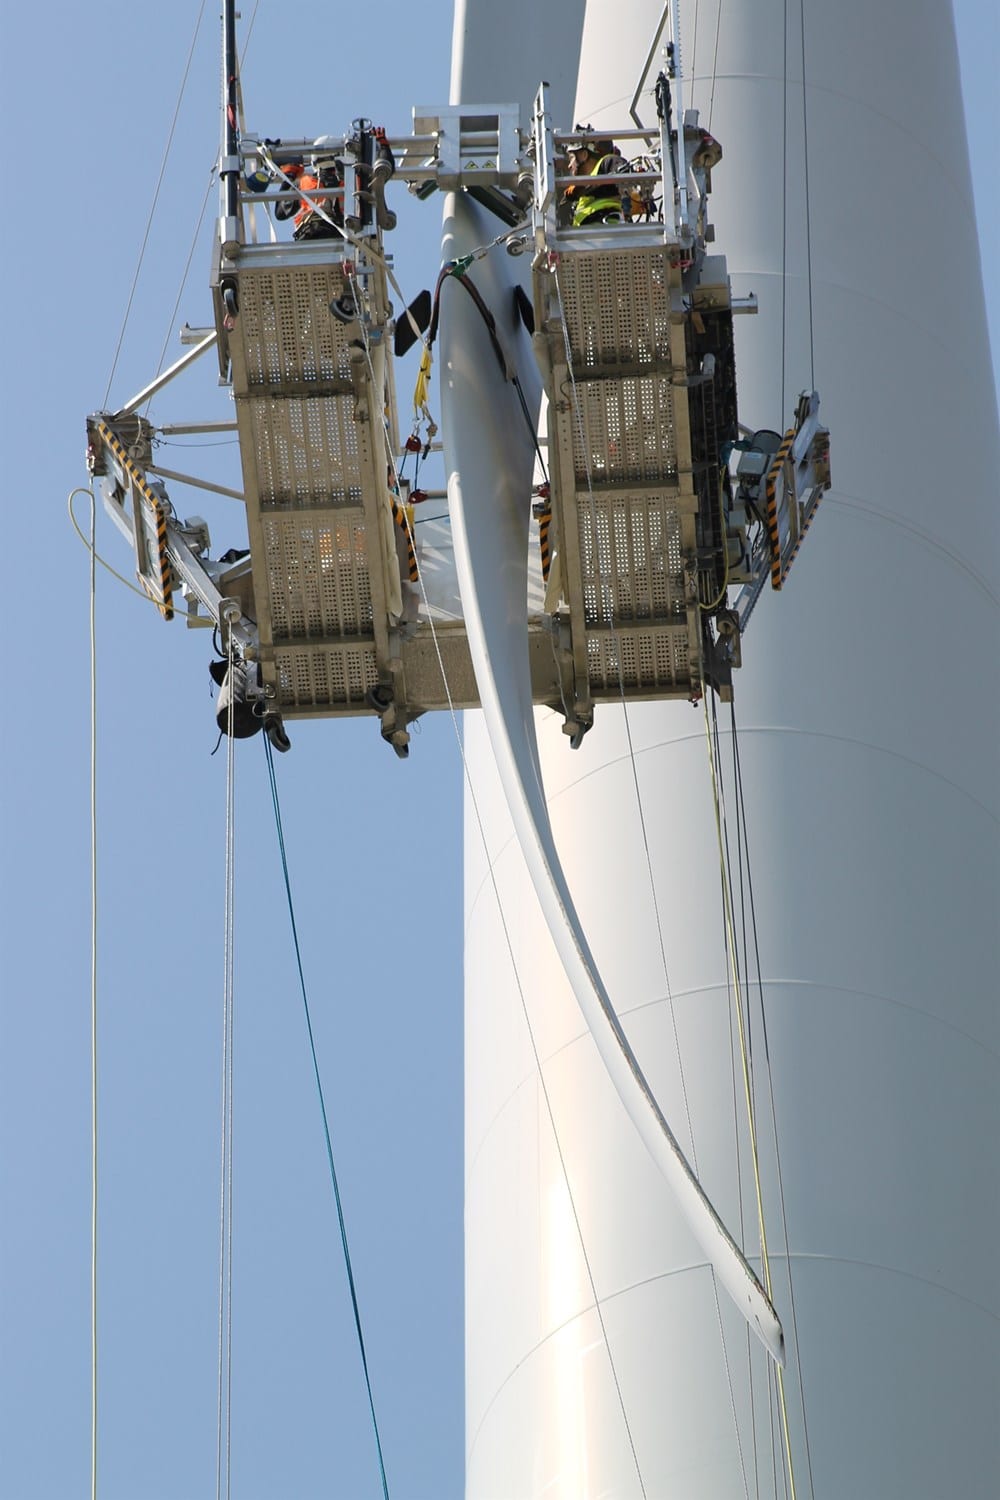 Perform complex repairs and maintenance work on wind turbine blades from a safe and comfortable blade access platform.